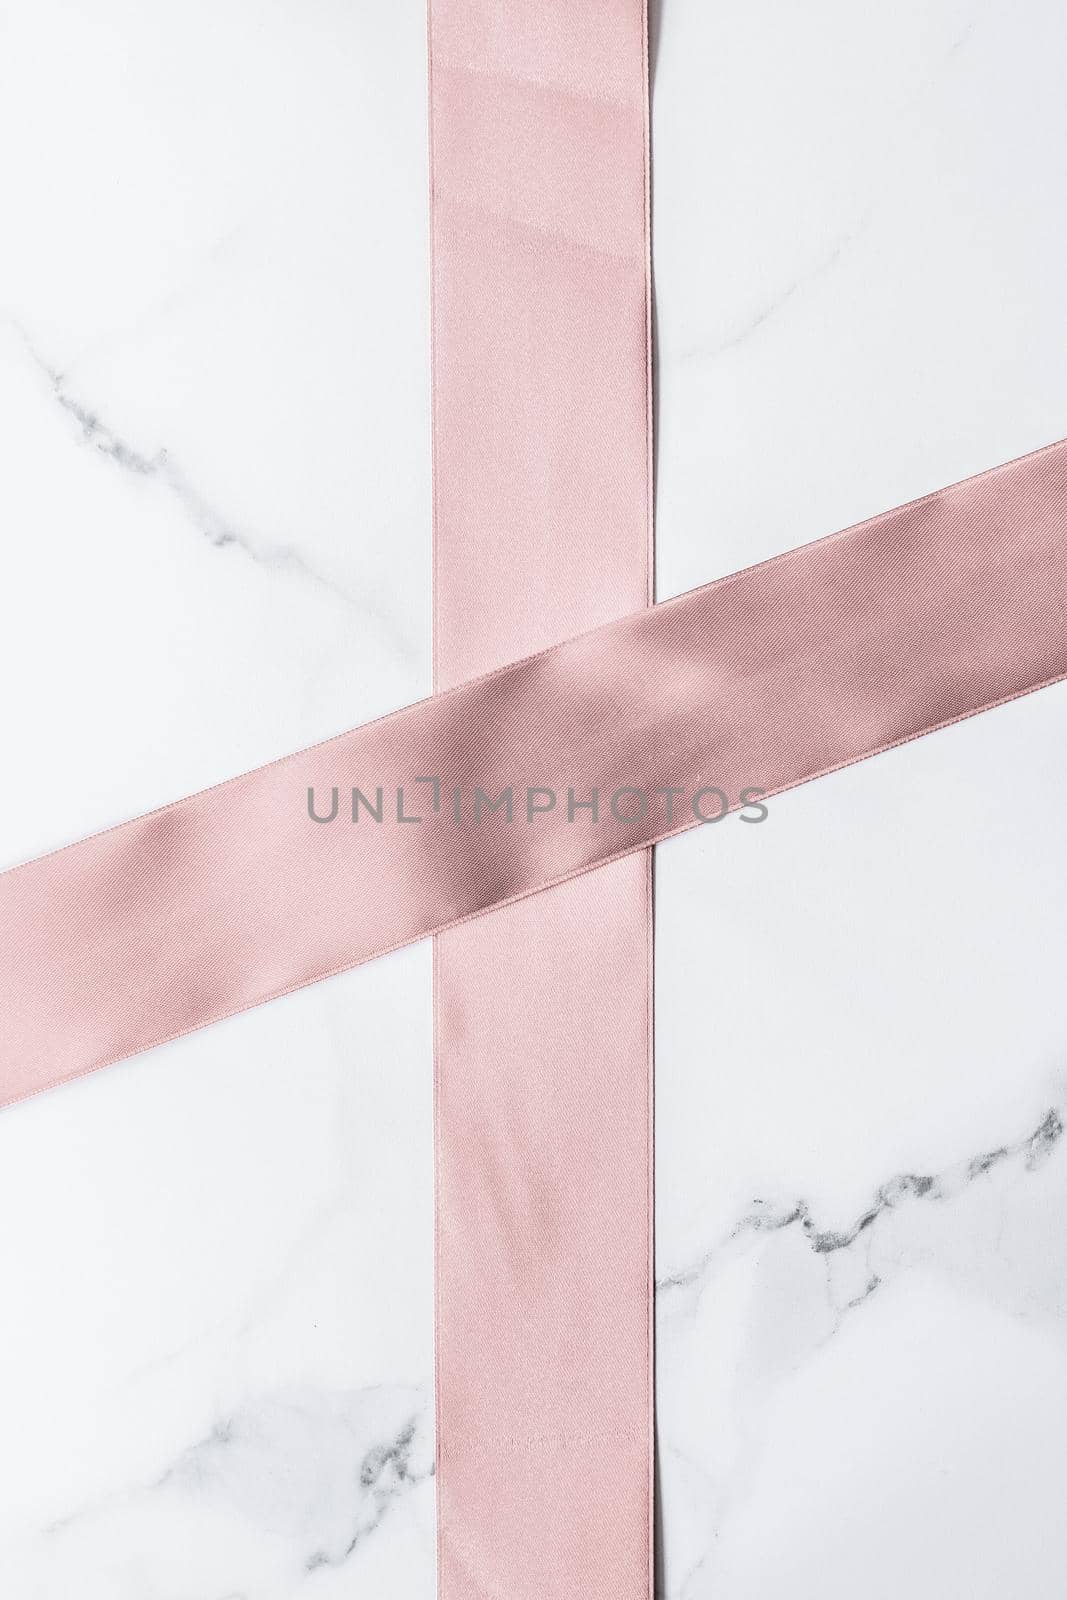 Birthday, wedding and girly branding concept - Beige silk ribbon and bow on marble background, glamour present mockup and fashion gift decoration for luxury beauty brand holiday flatlay design